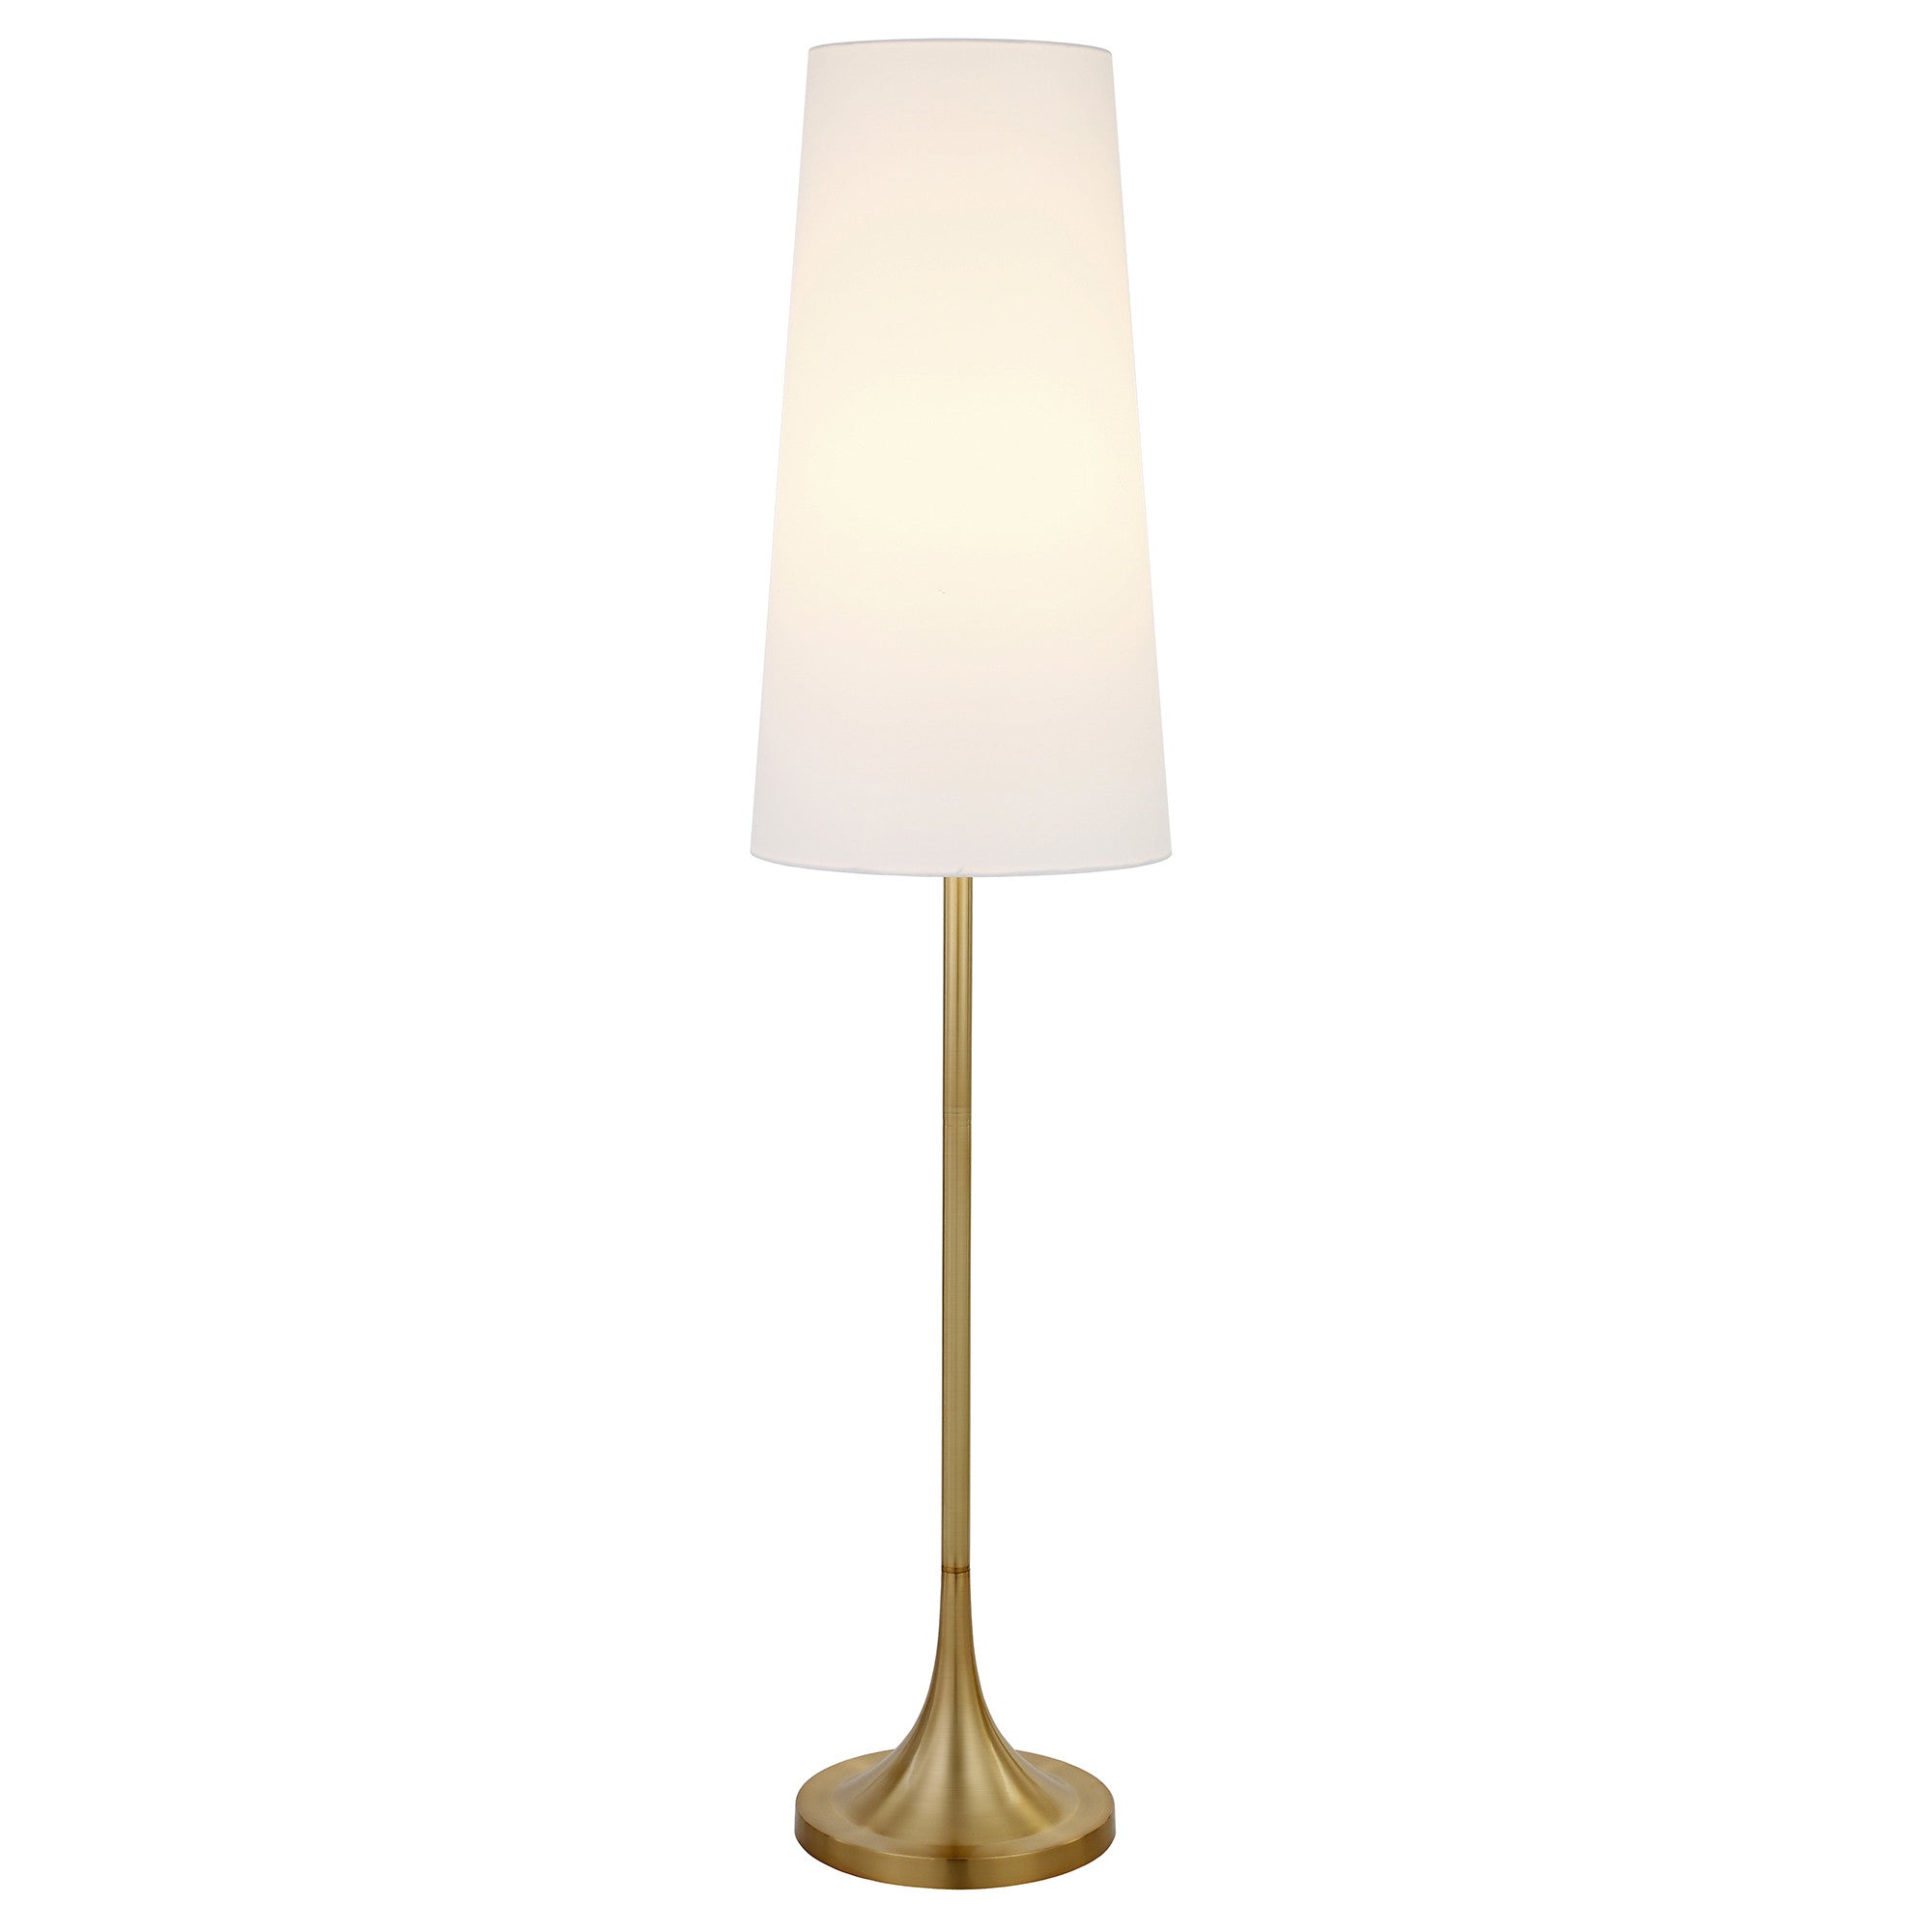 60" Brass Novelty Floor Lamp With White Frosted Glass Drum Shade